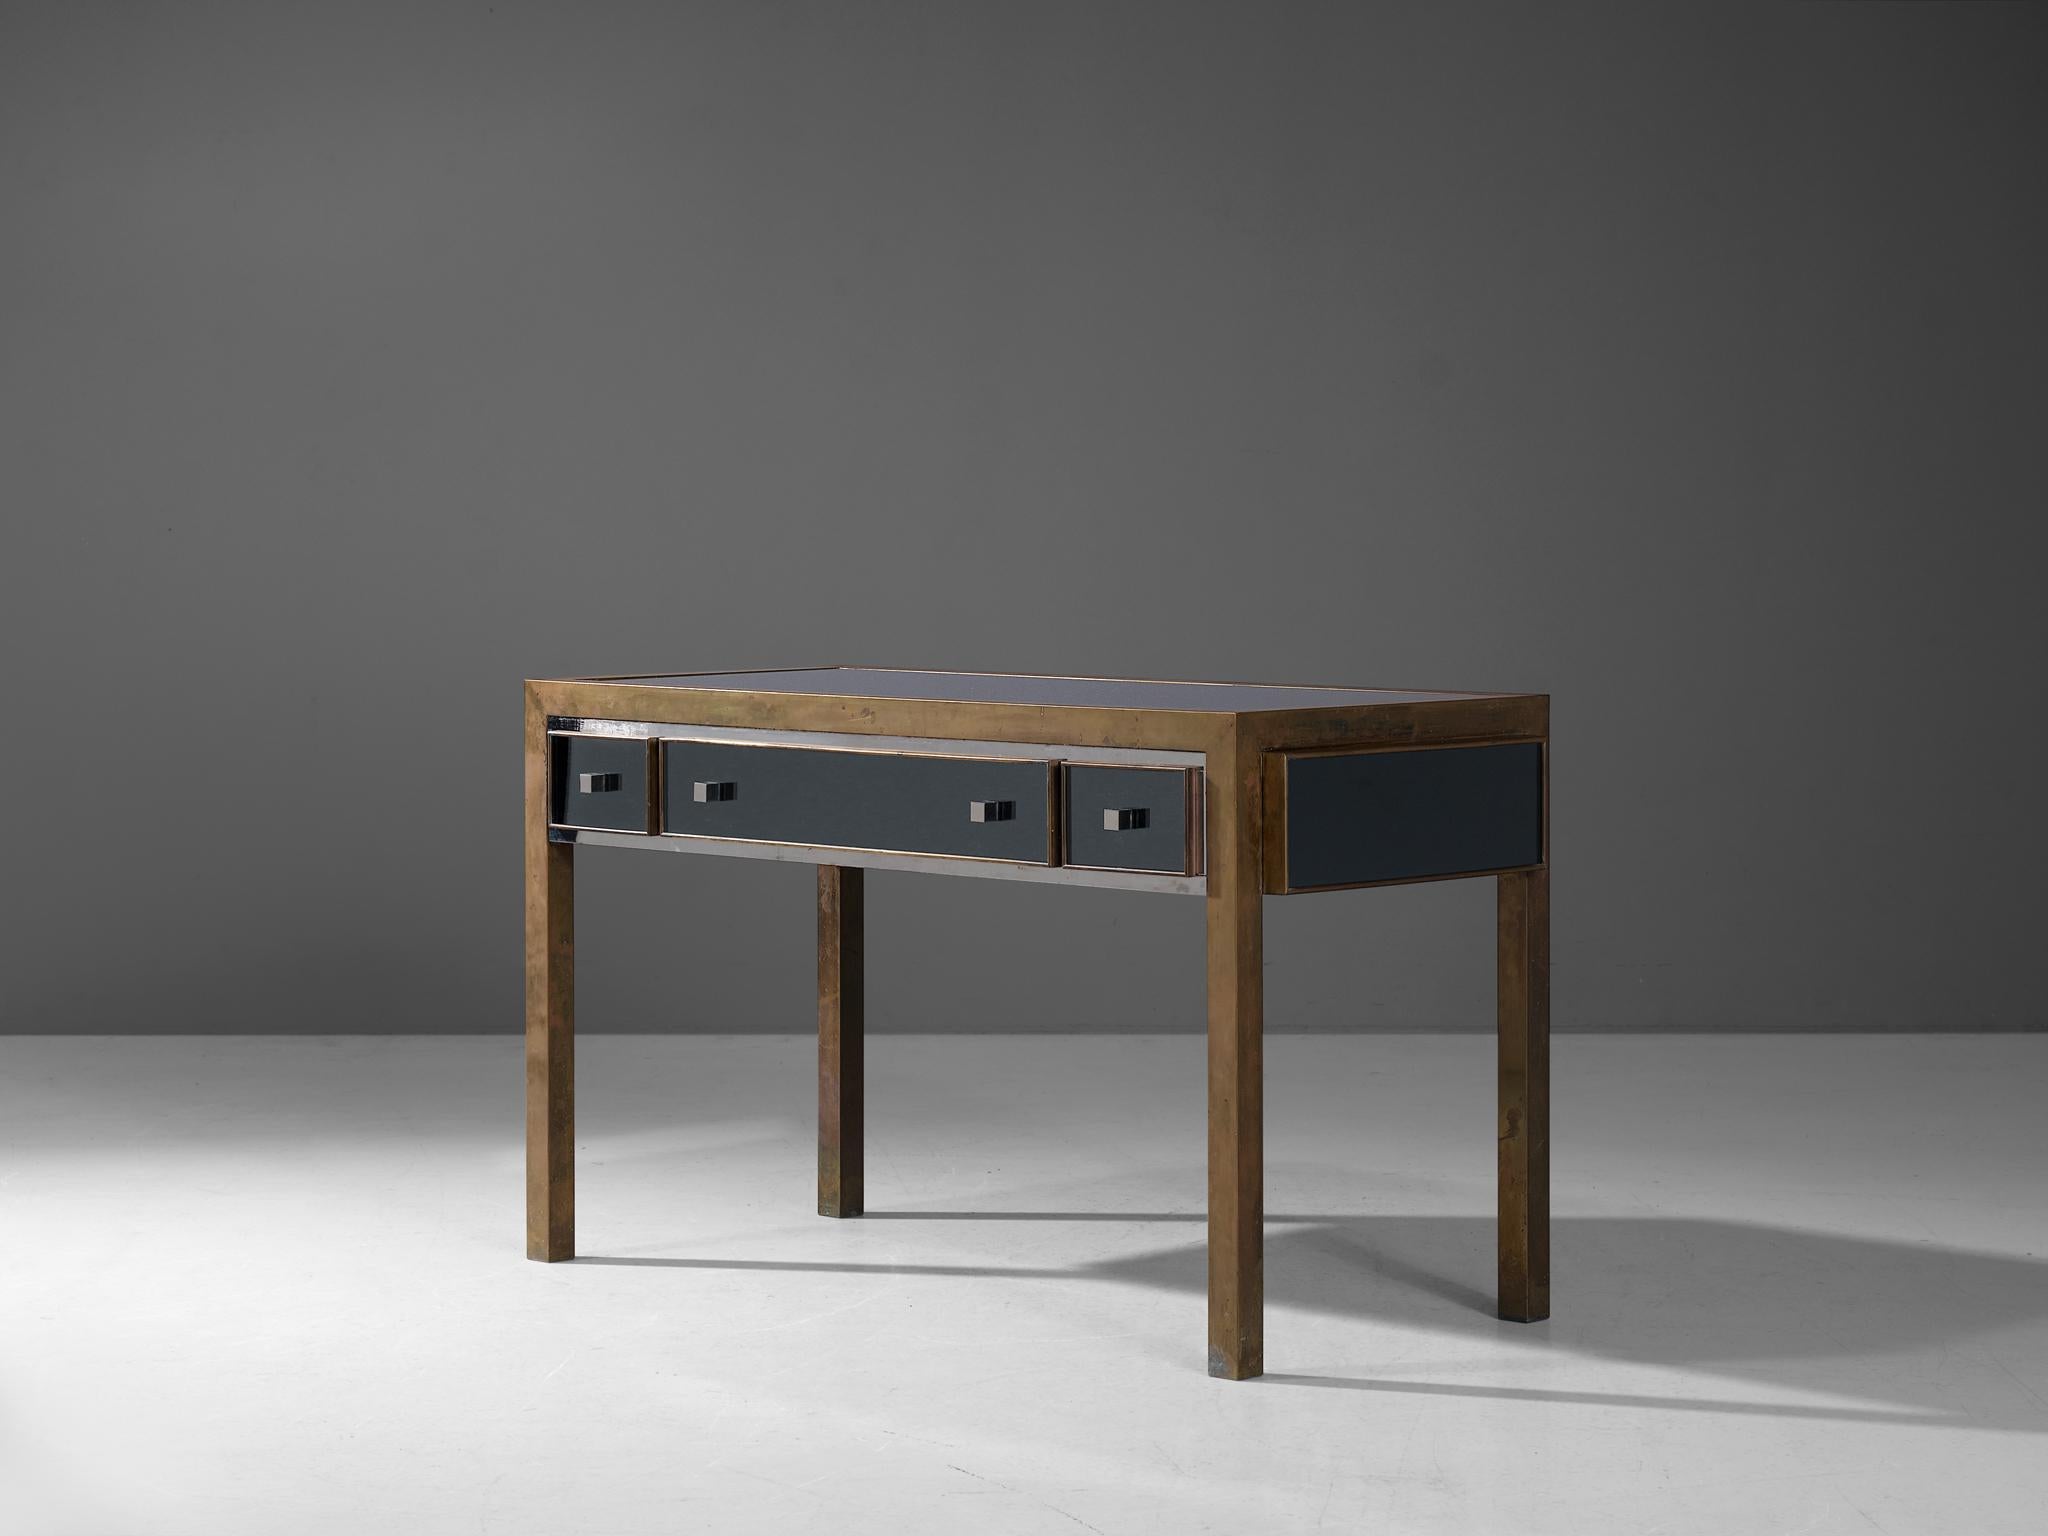 Michel Pigneres, console, lacquered metal, smoked mirrored glass, brass, steel, France, 1960s.

This exquisite console is beautifully designed featuring a nice structure of sharp lines and geometrical shapes. This item is exemplary for refined,